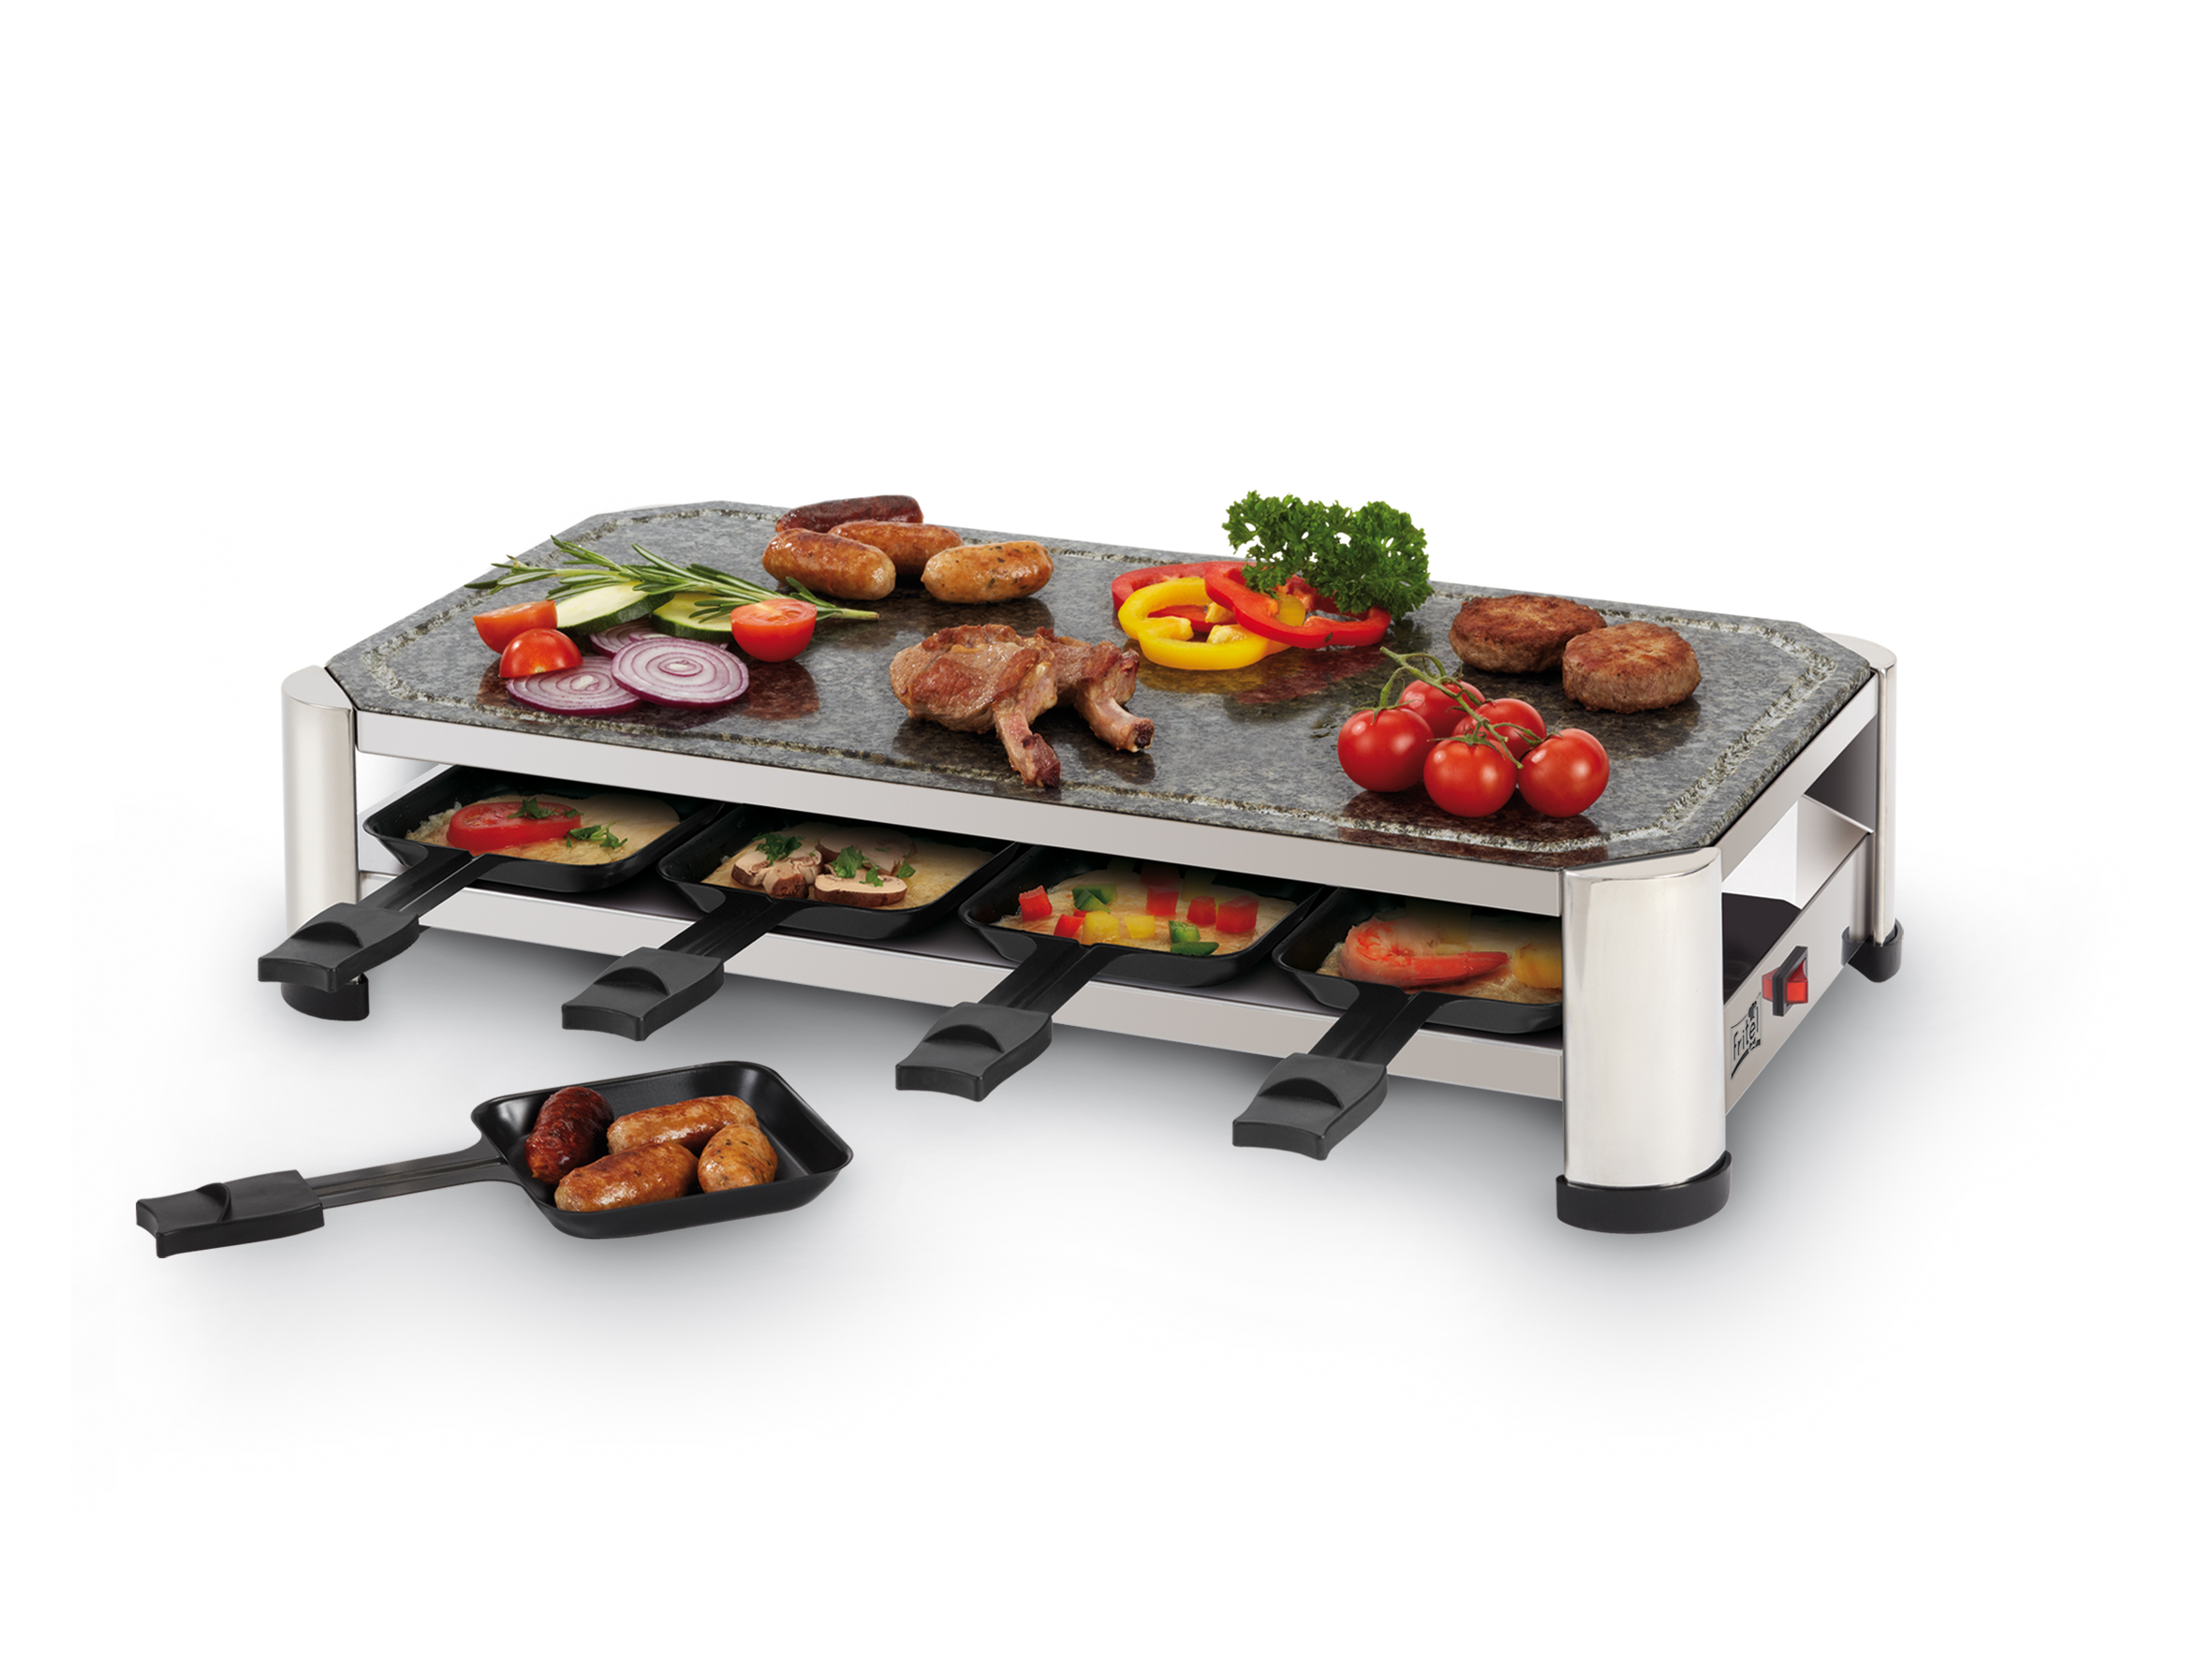 Image of Fritel raclette/steengrill SG 2180